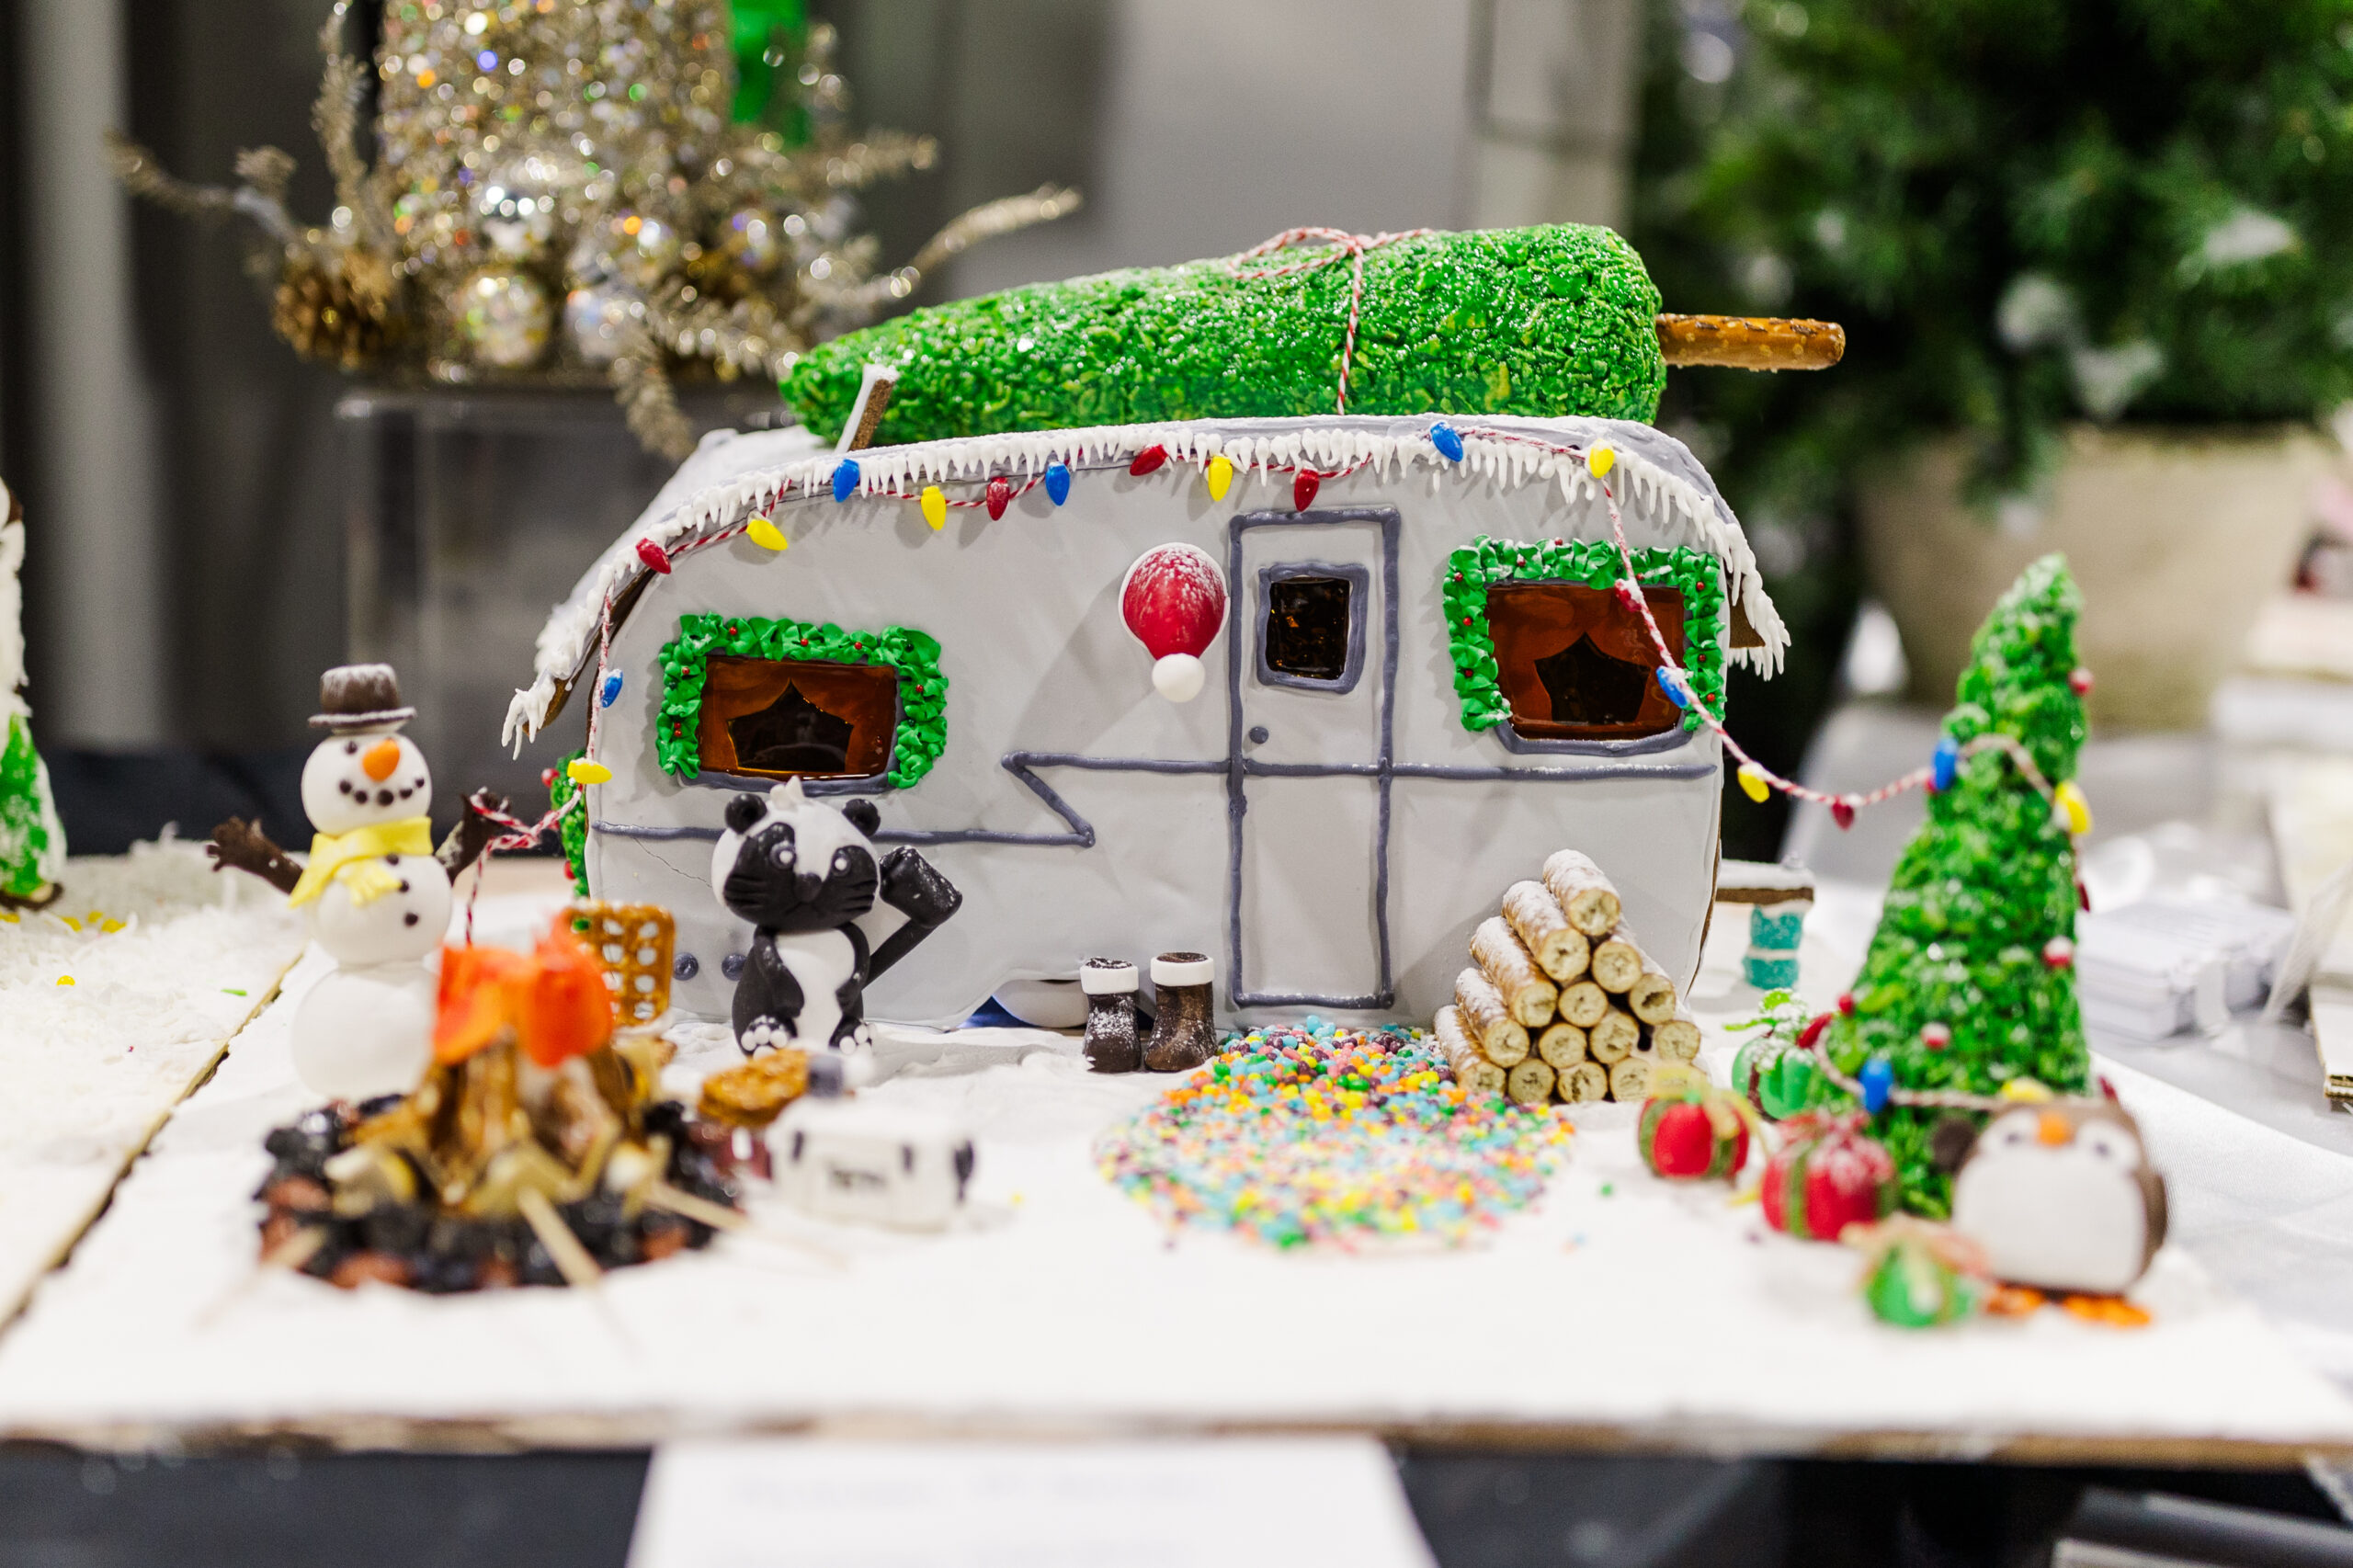 Most Creative - Gingerbread<br>“Camping Christmas” by Kathleen McDaniel